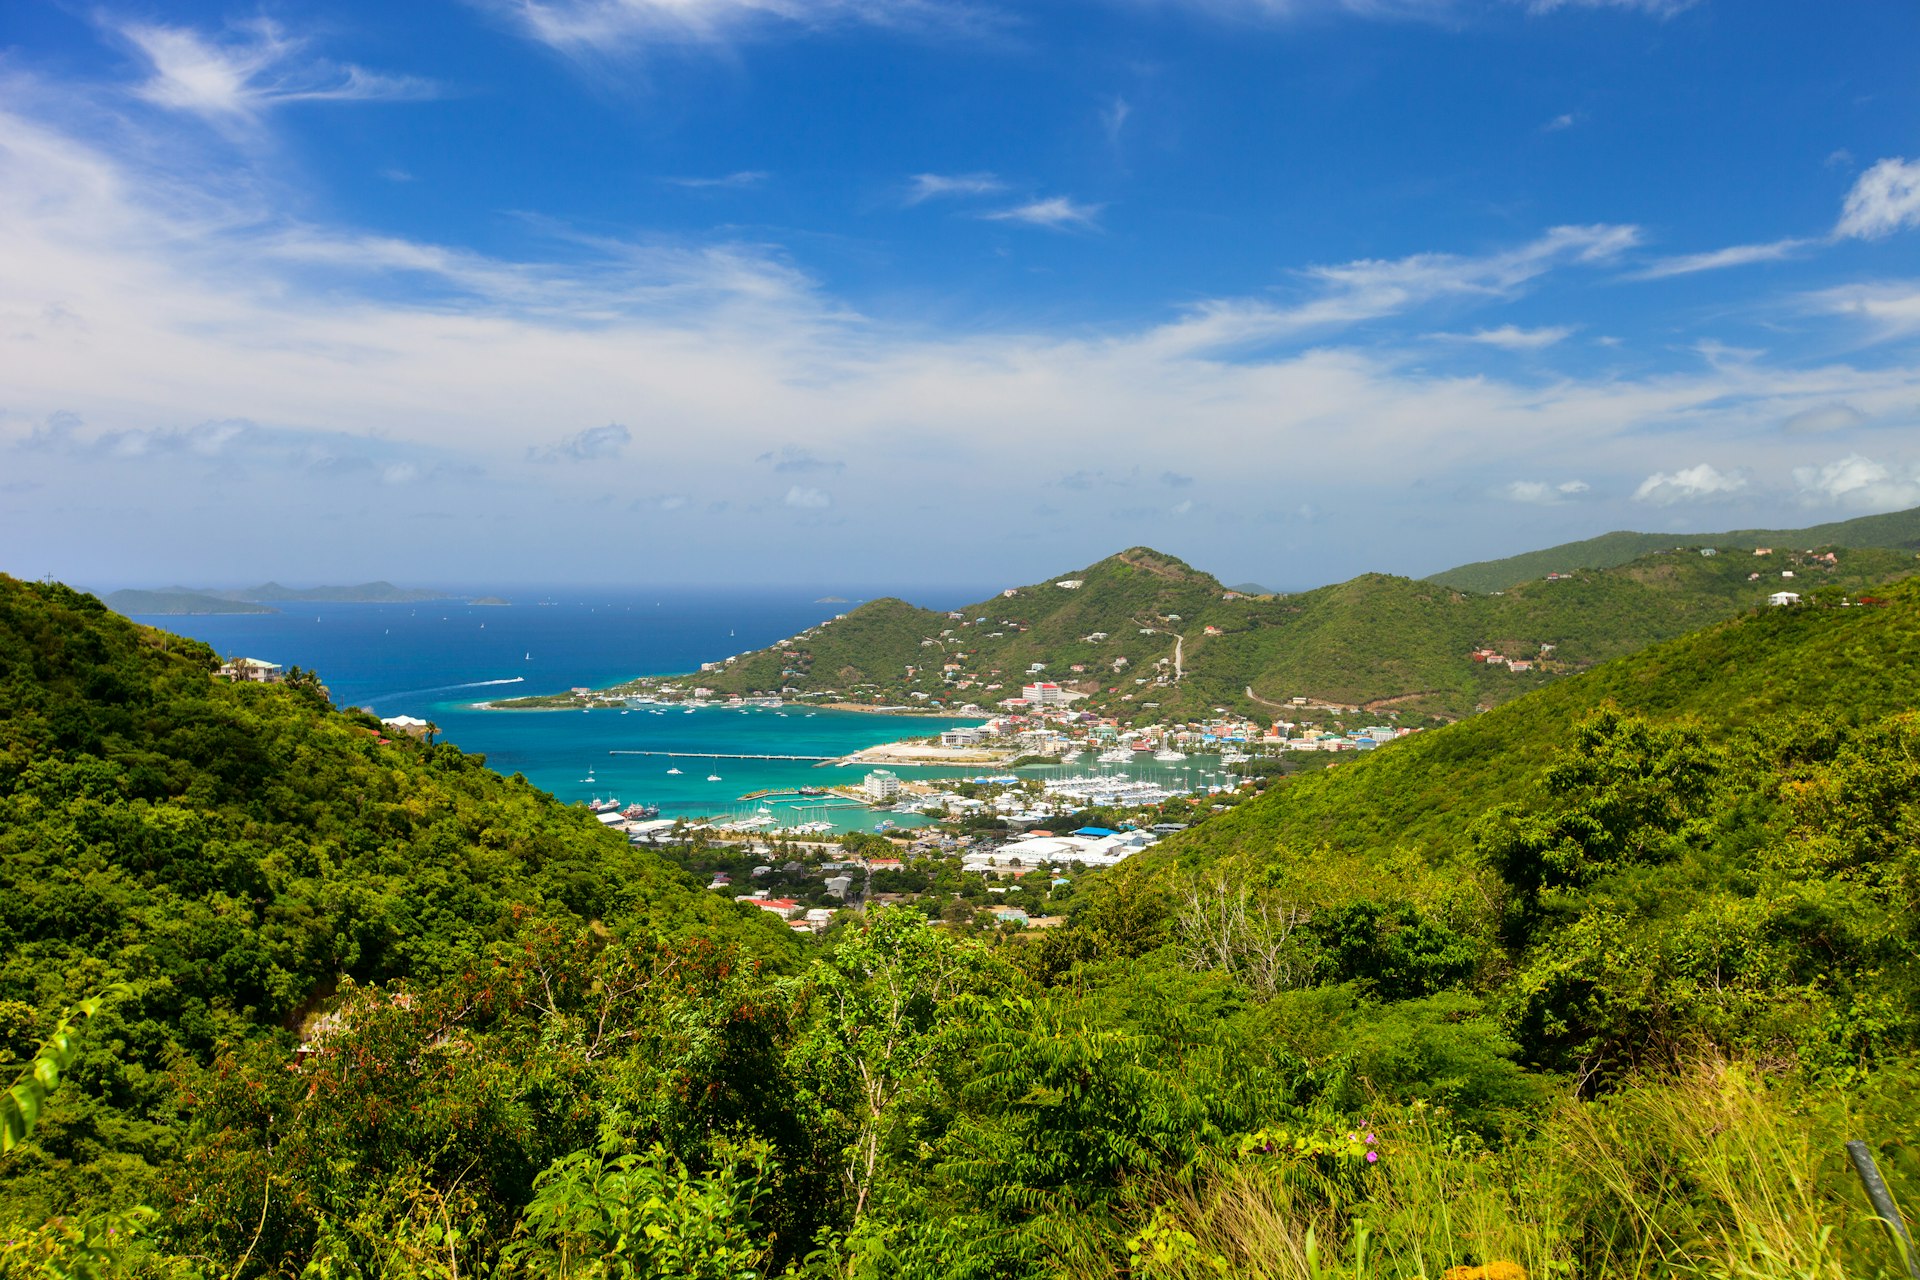 An aerial view of Tortola in the British Virgin Islands